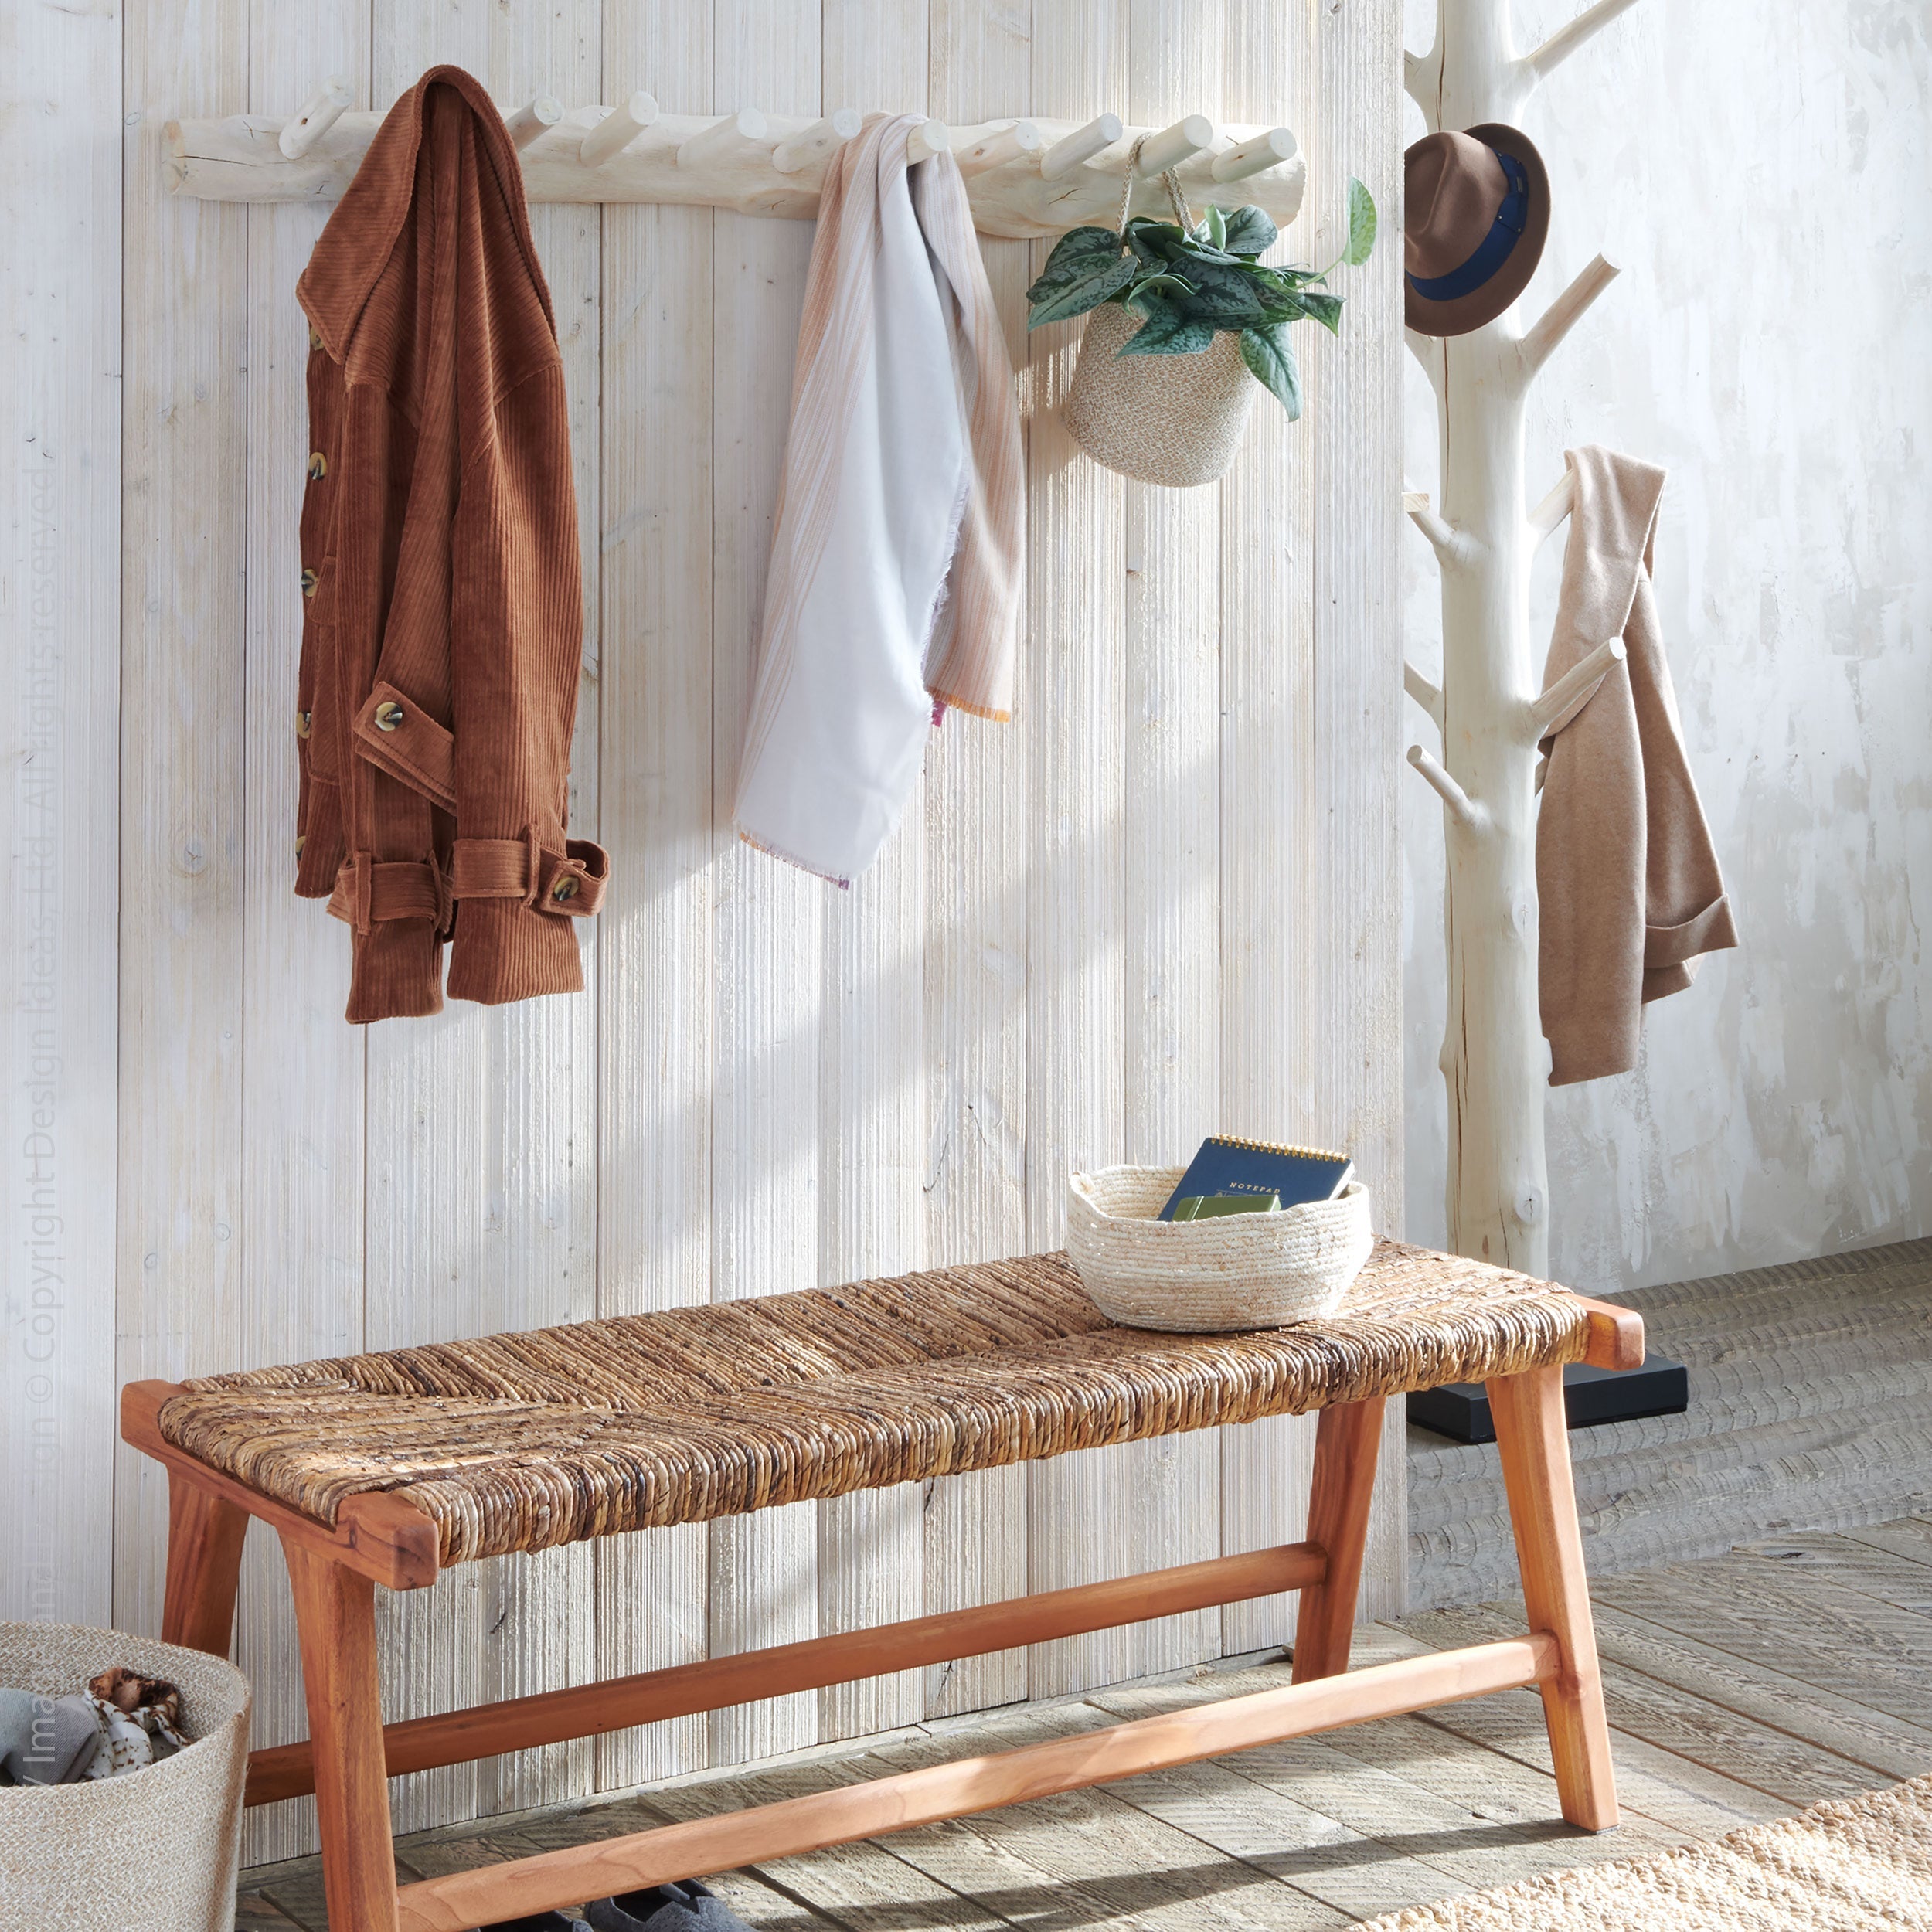 Copenhagen Banana Tree Bark Bench Natural Color | Image 2 | From the Copenhagen Collection | Masterfully crafted with natural banana tree bark for long lasting use | Available in natural color | texxture home